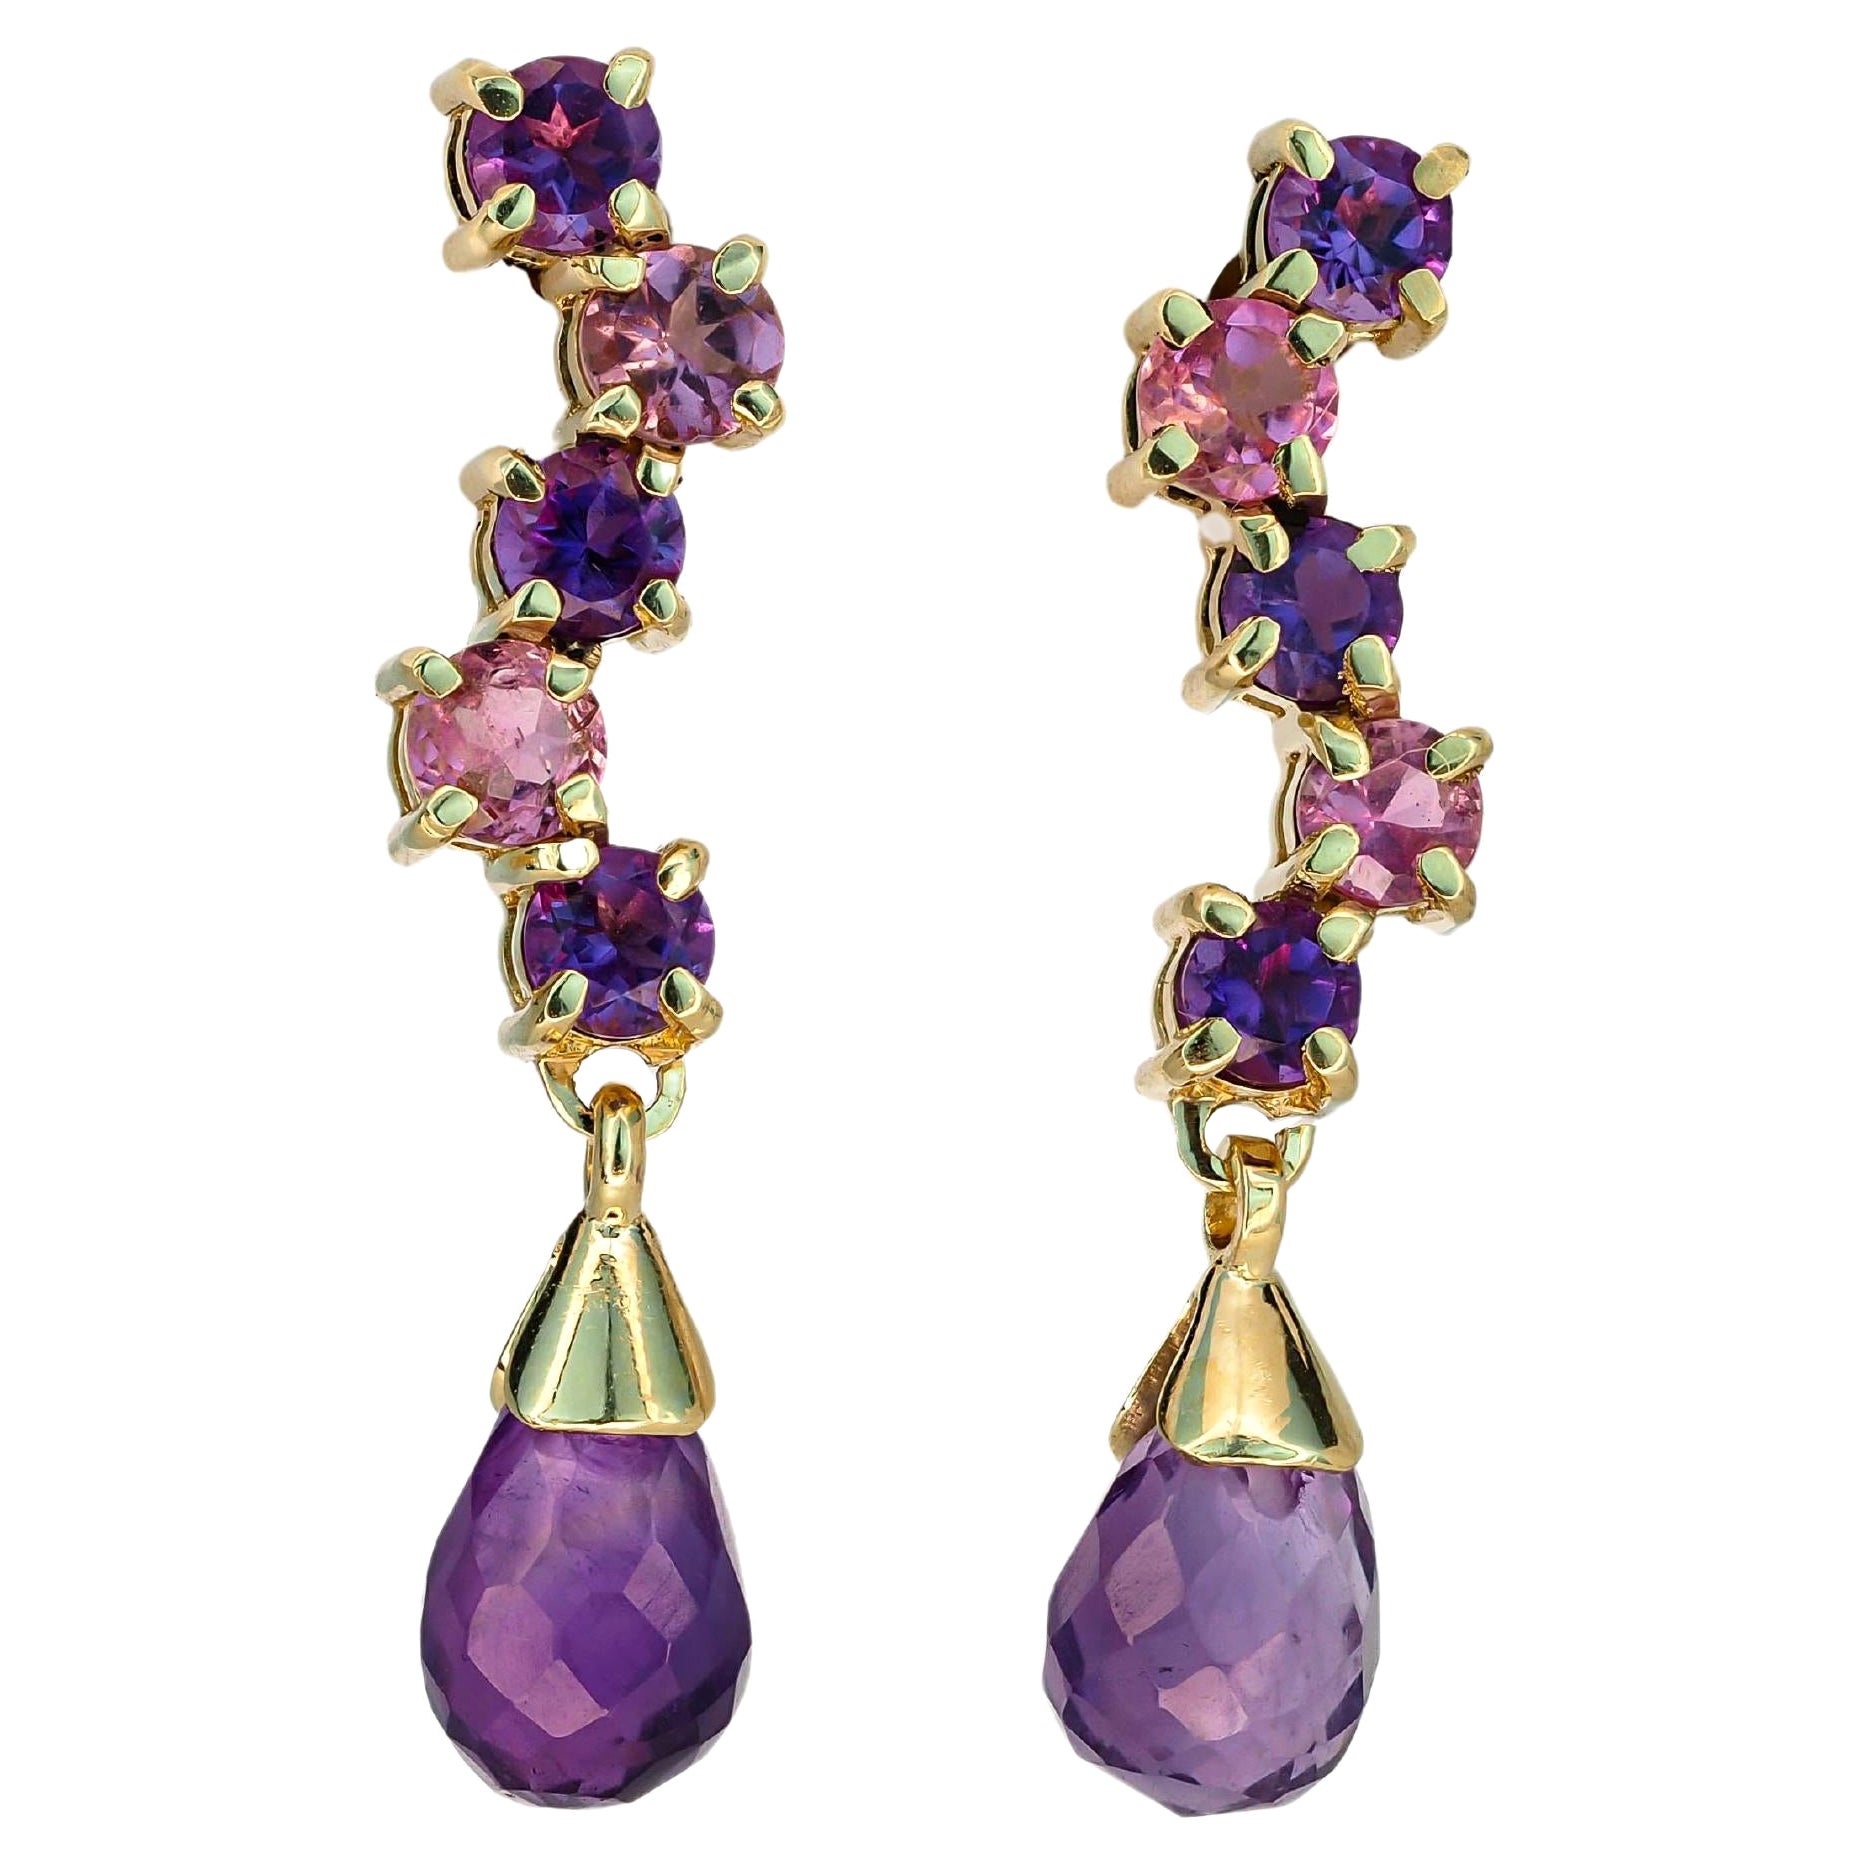 14k Gold Drop Earrings Studs with Amethysts and Sapphires